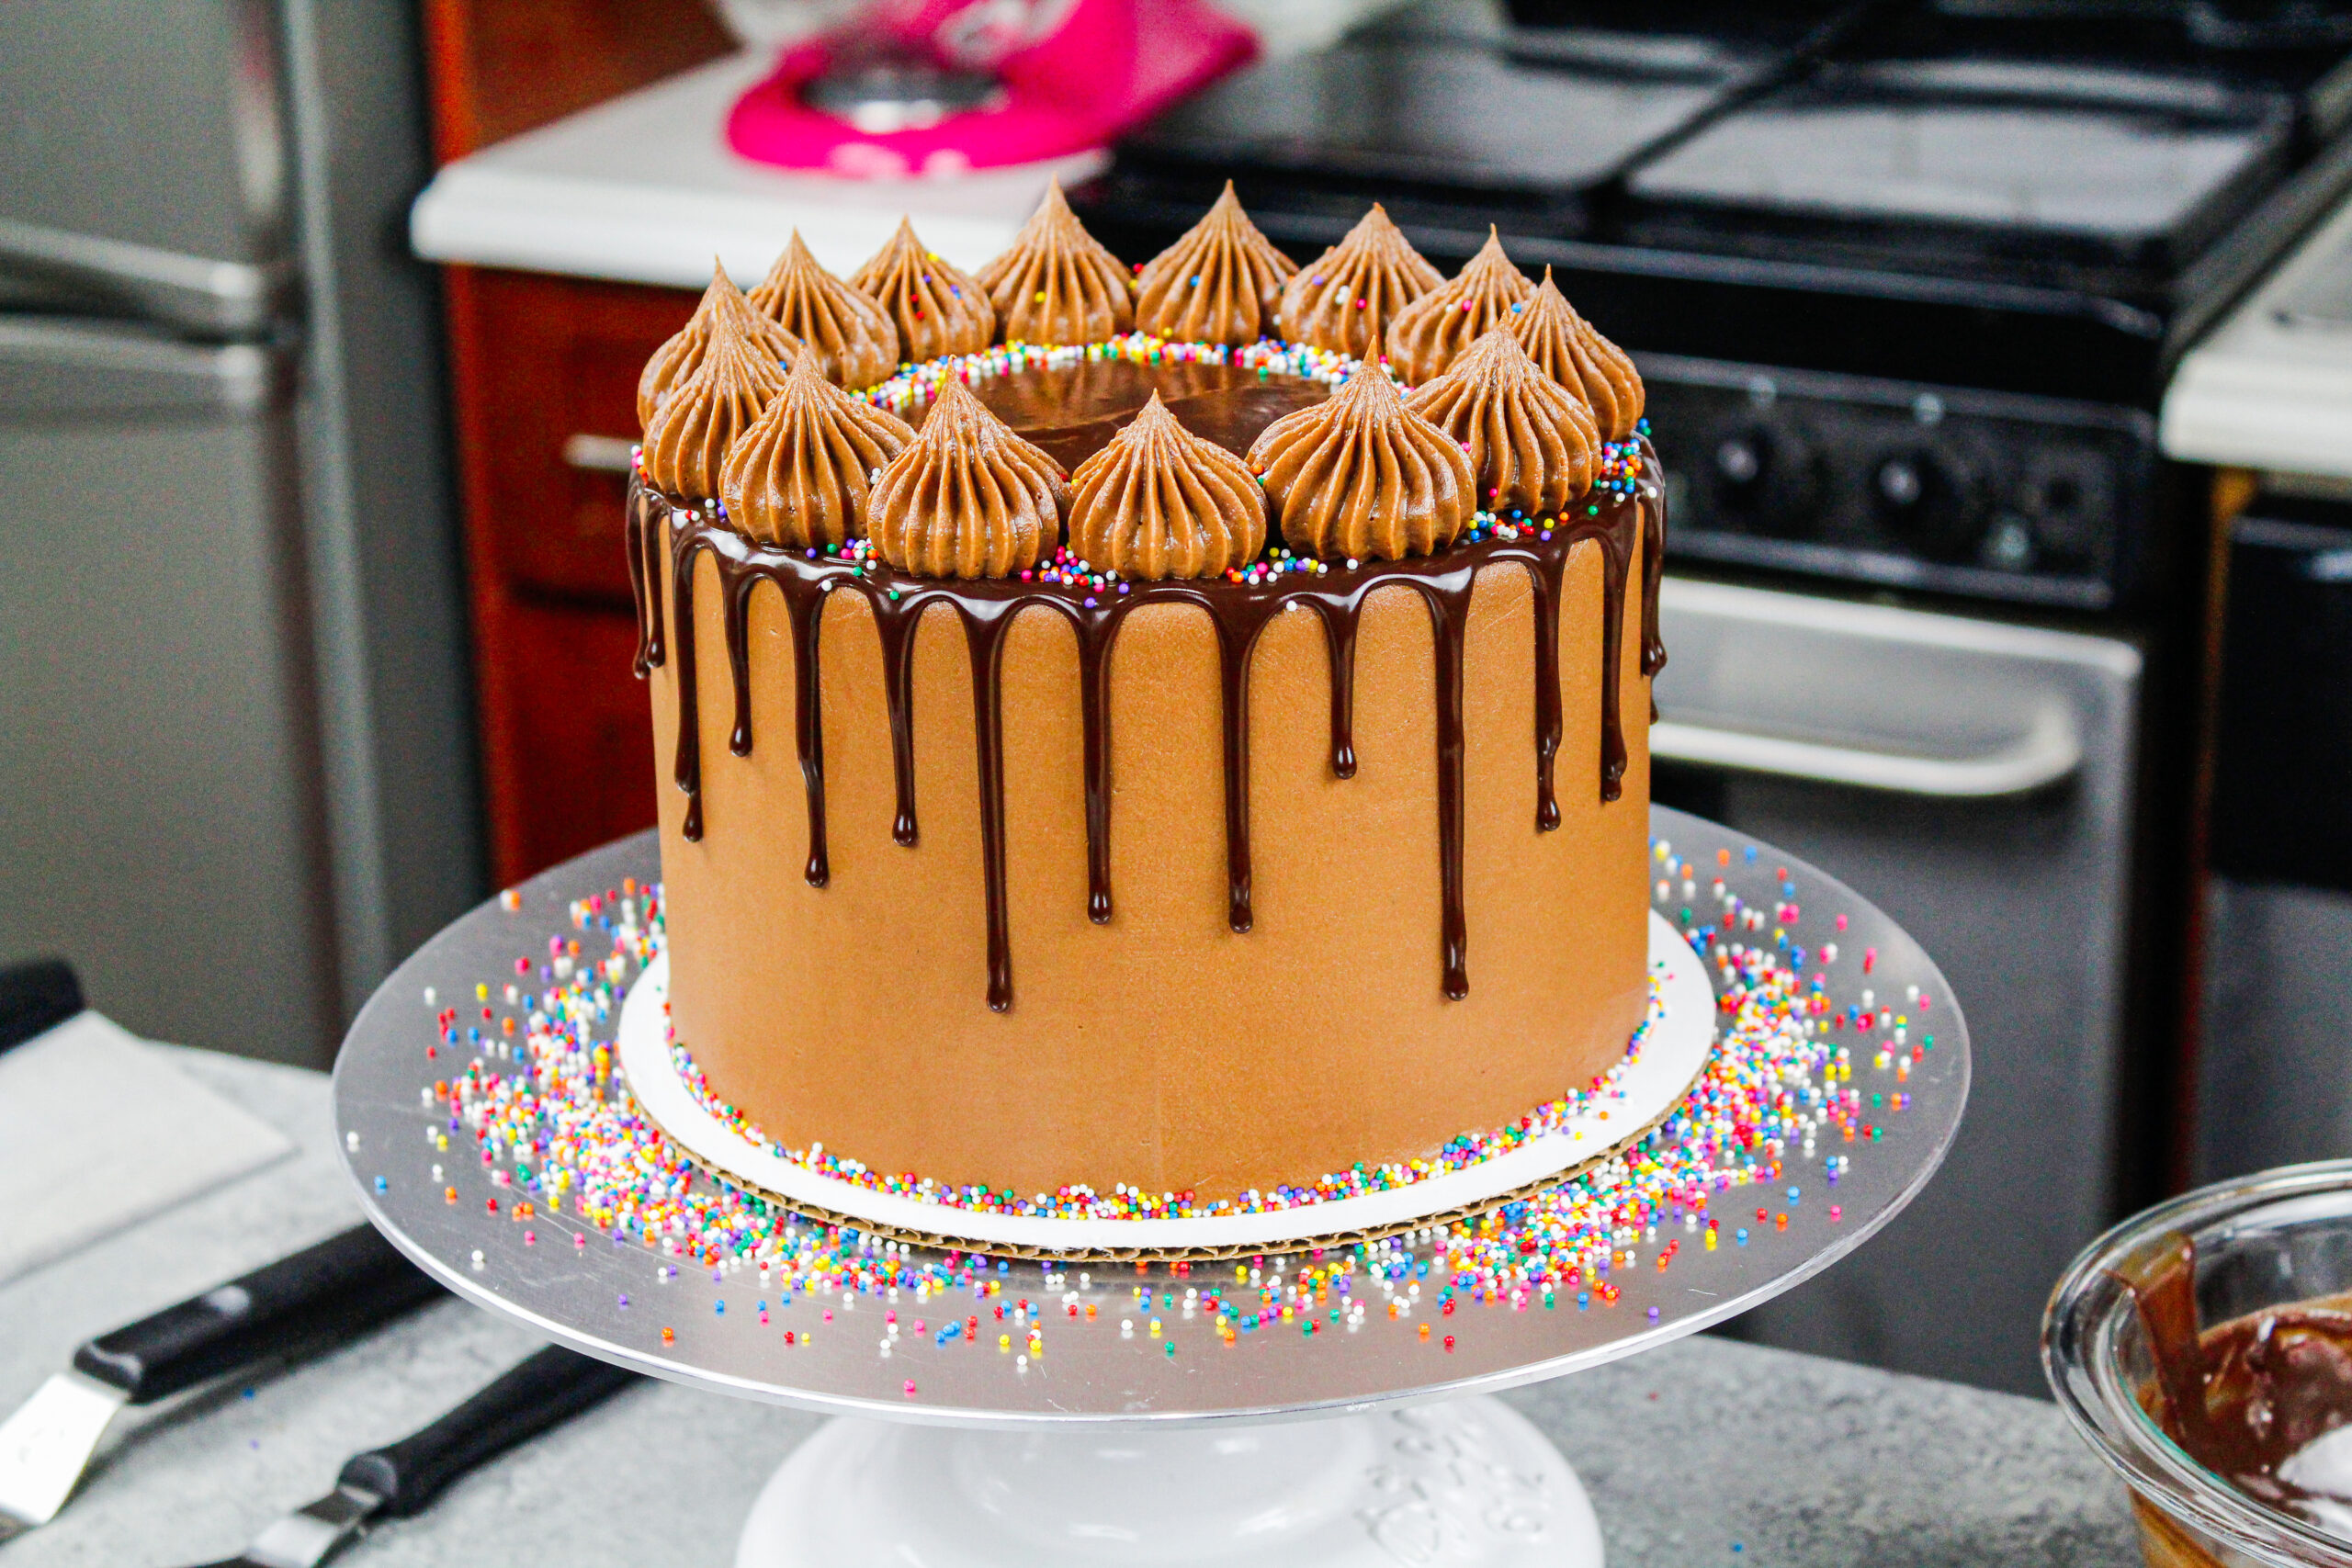 How To Make A Chocolate Drip Cake Easy Recipe And Video Tutorial